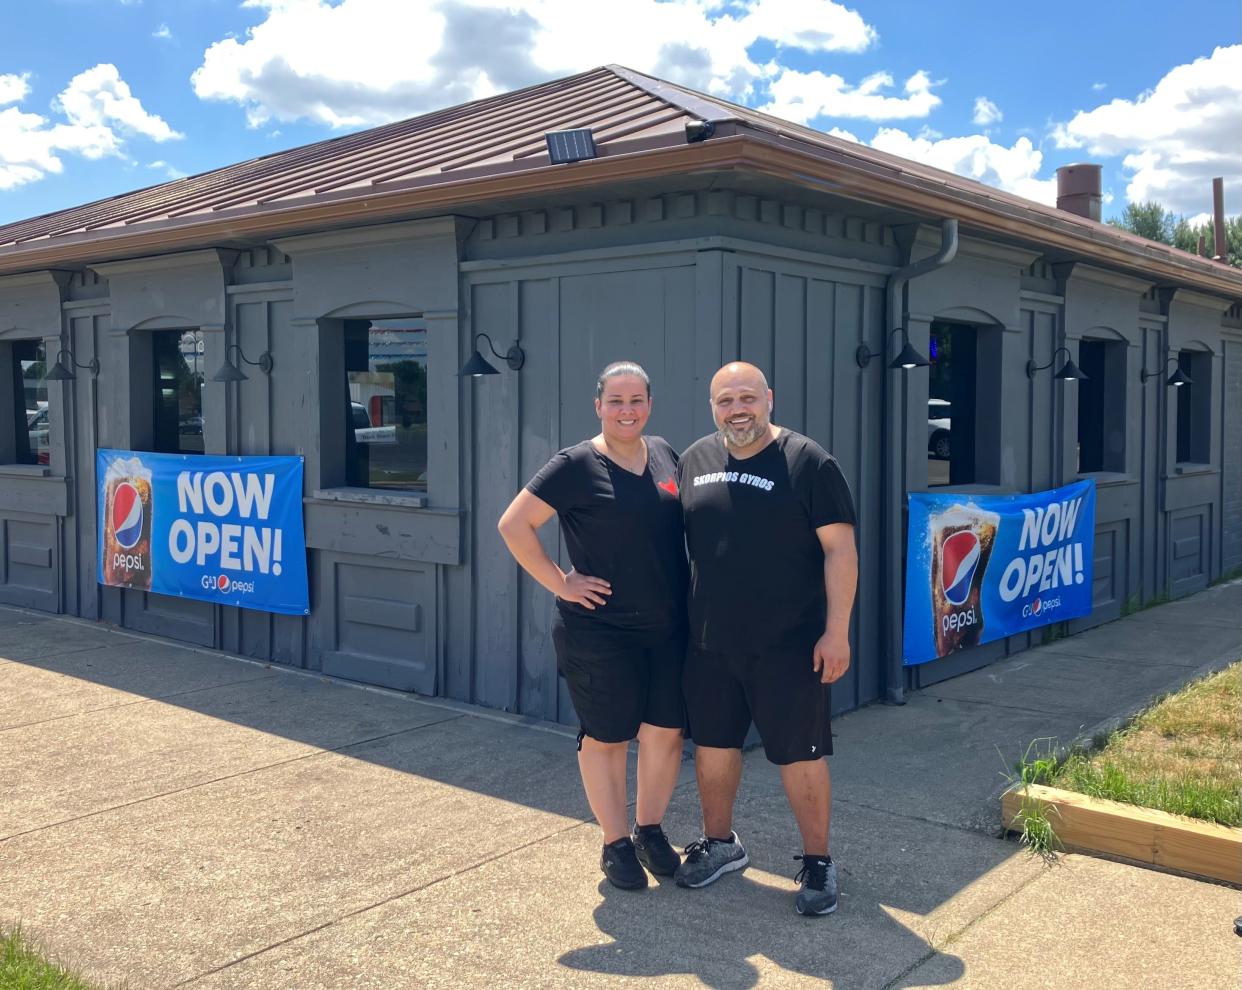 Alaa Babieh and wife Farah Hussein, owners of Skorpios Gyros, have opened Al's Chicken Lab in the former Pizza Hut building on North 21st St., in Newark.